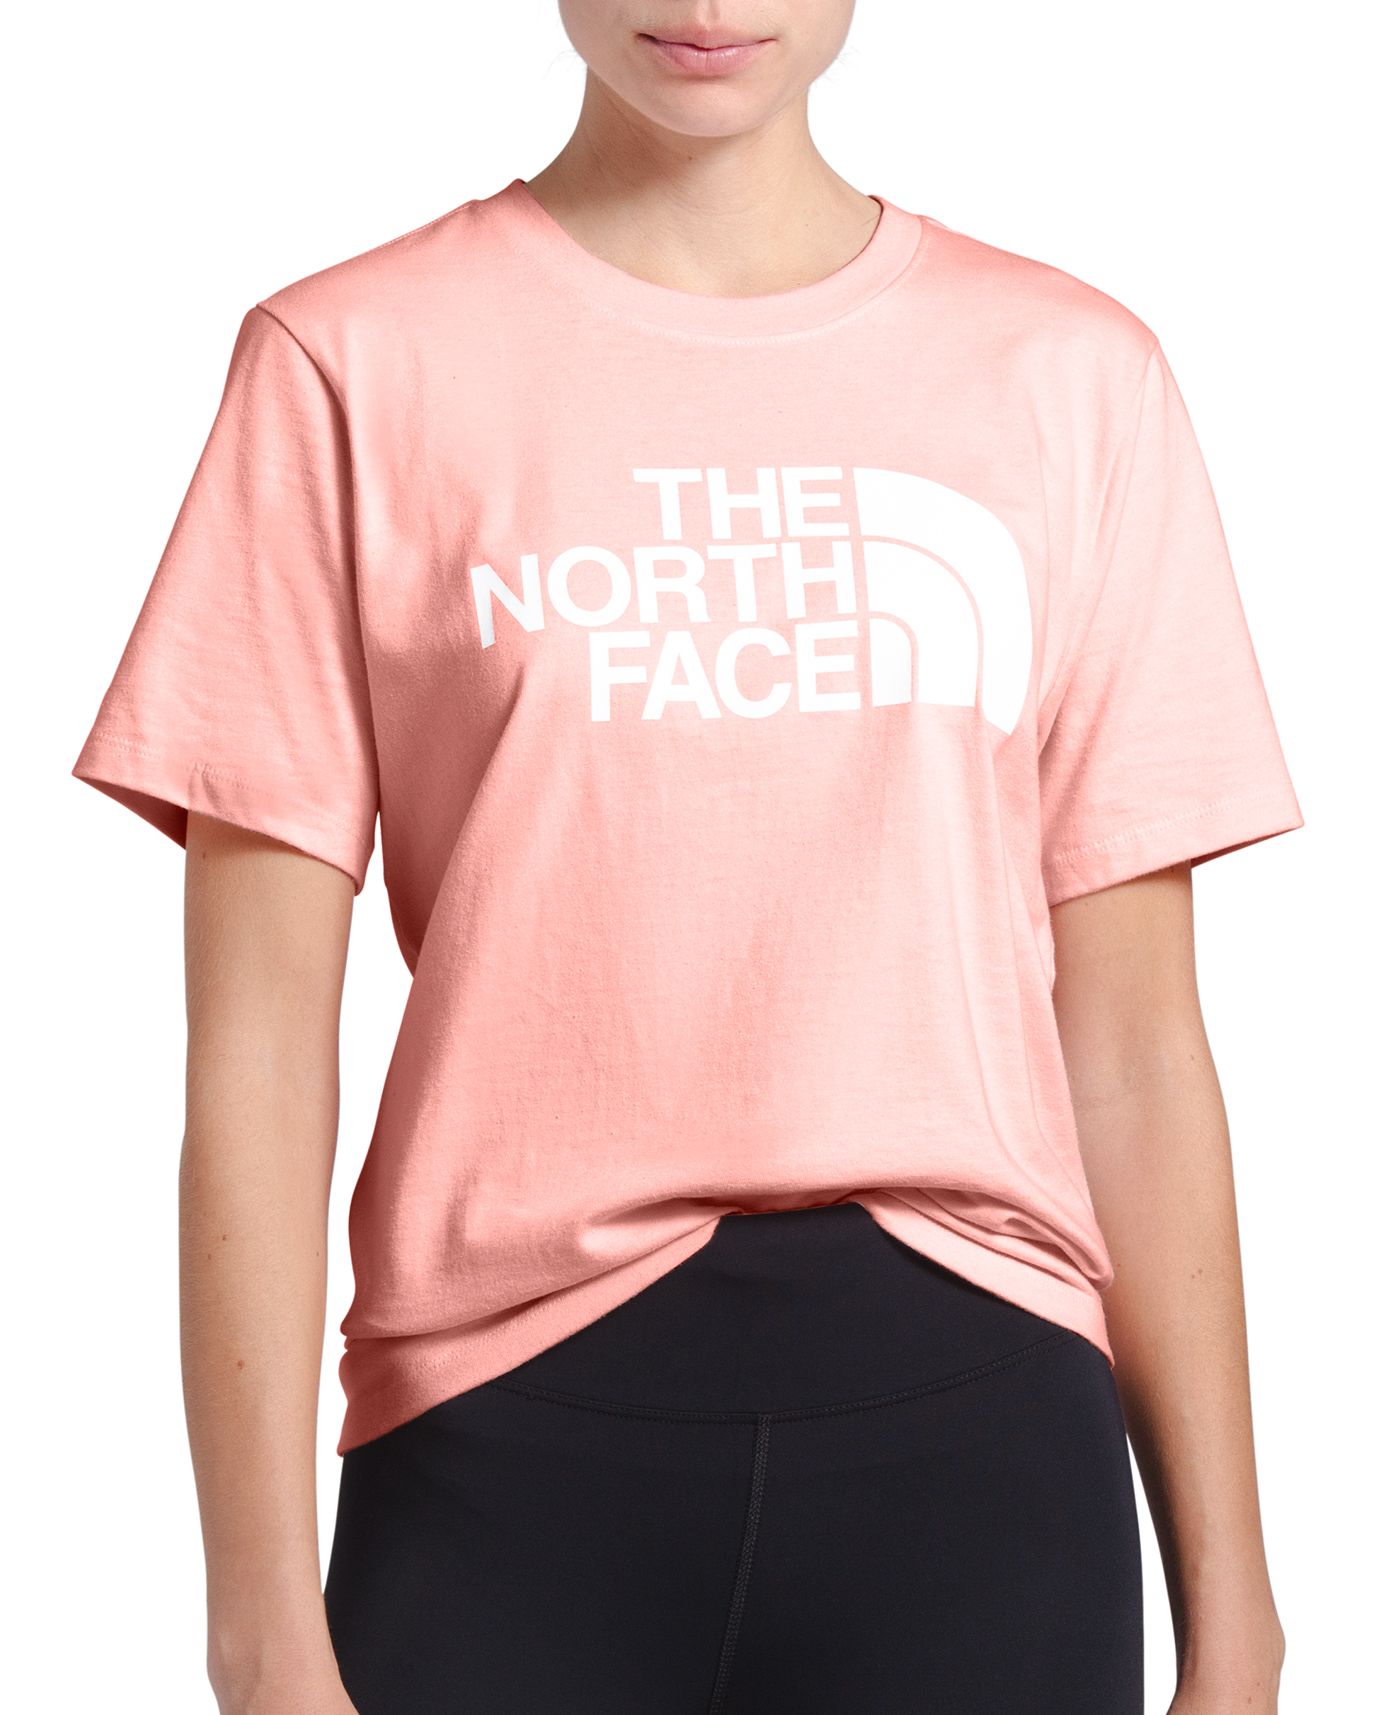 The North Face Women's Half Dome T-Shirt | DICK'S Sporting Goods